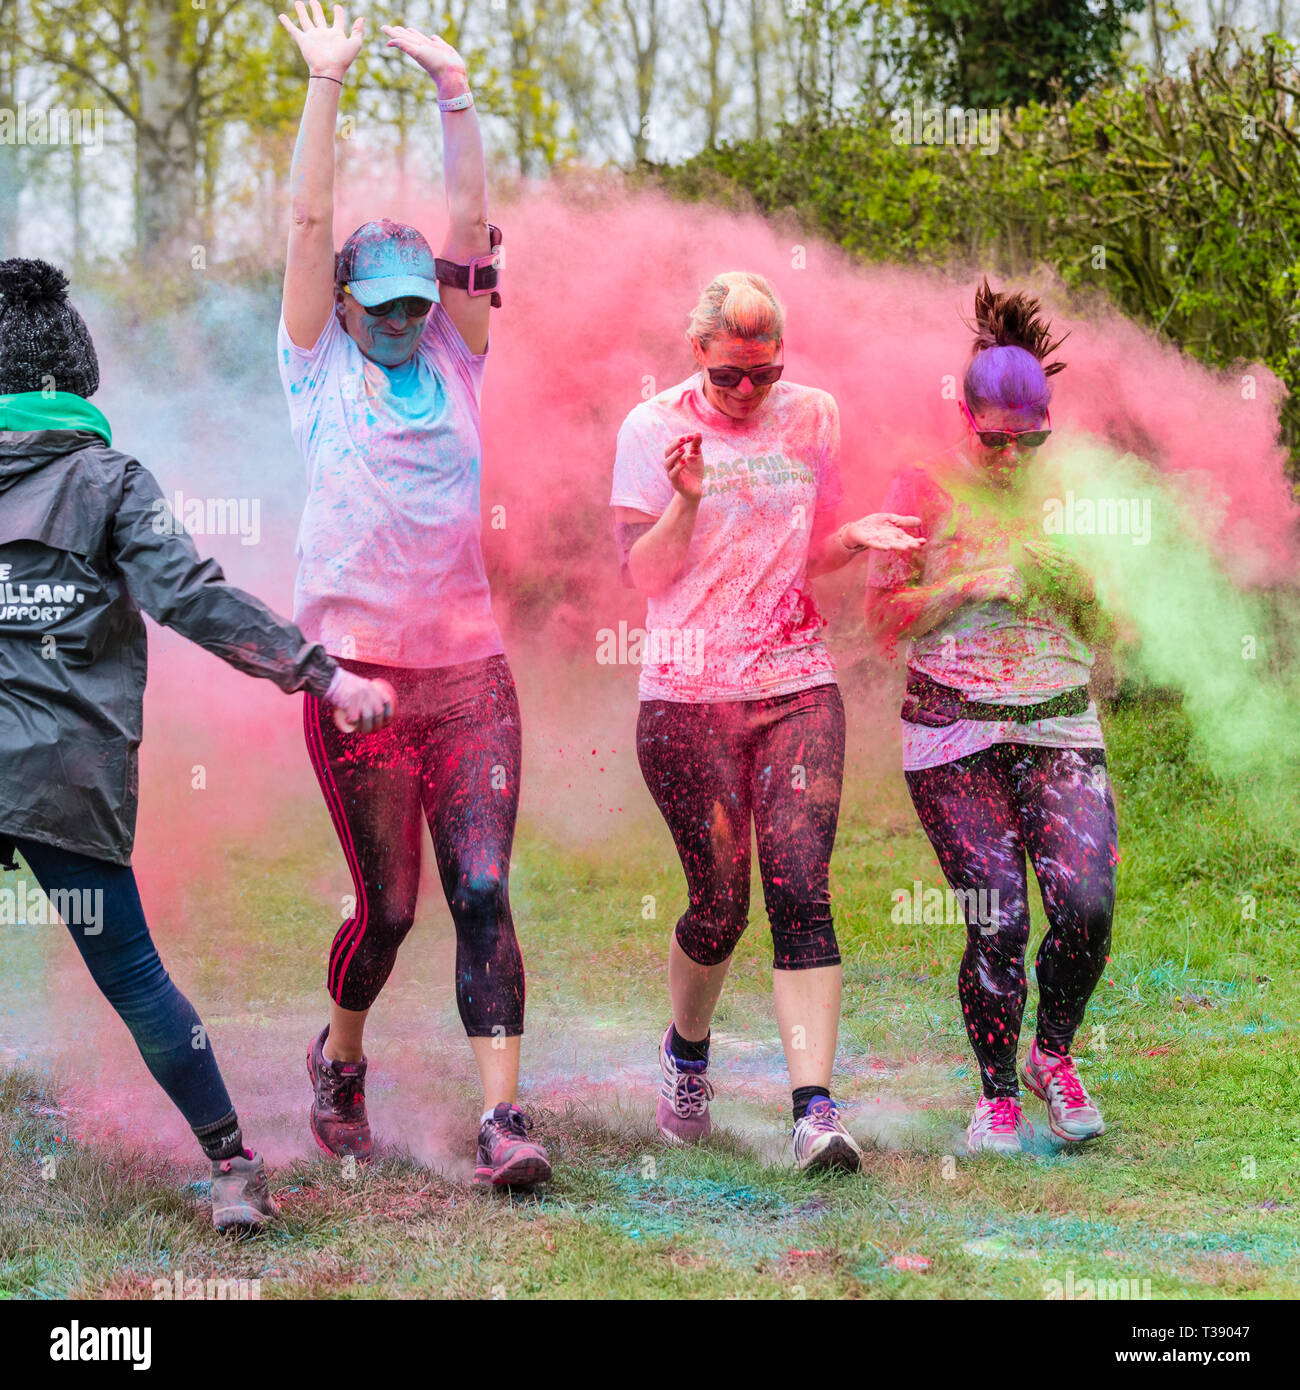 https://c8.alamy.com/comp/T39047/three-women-runners-being-covered-in-paint-on-macmillan-cancer-charity-5k-color-fun-run-T39047.jpg